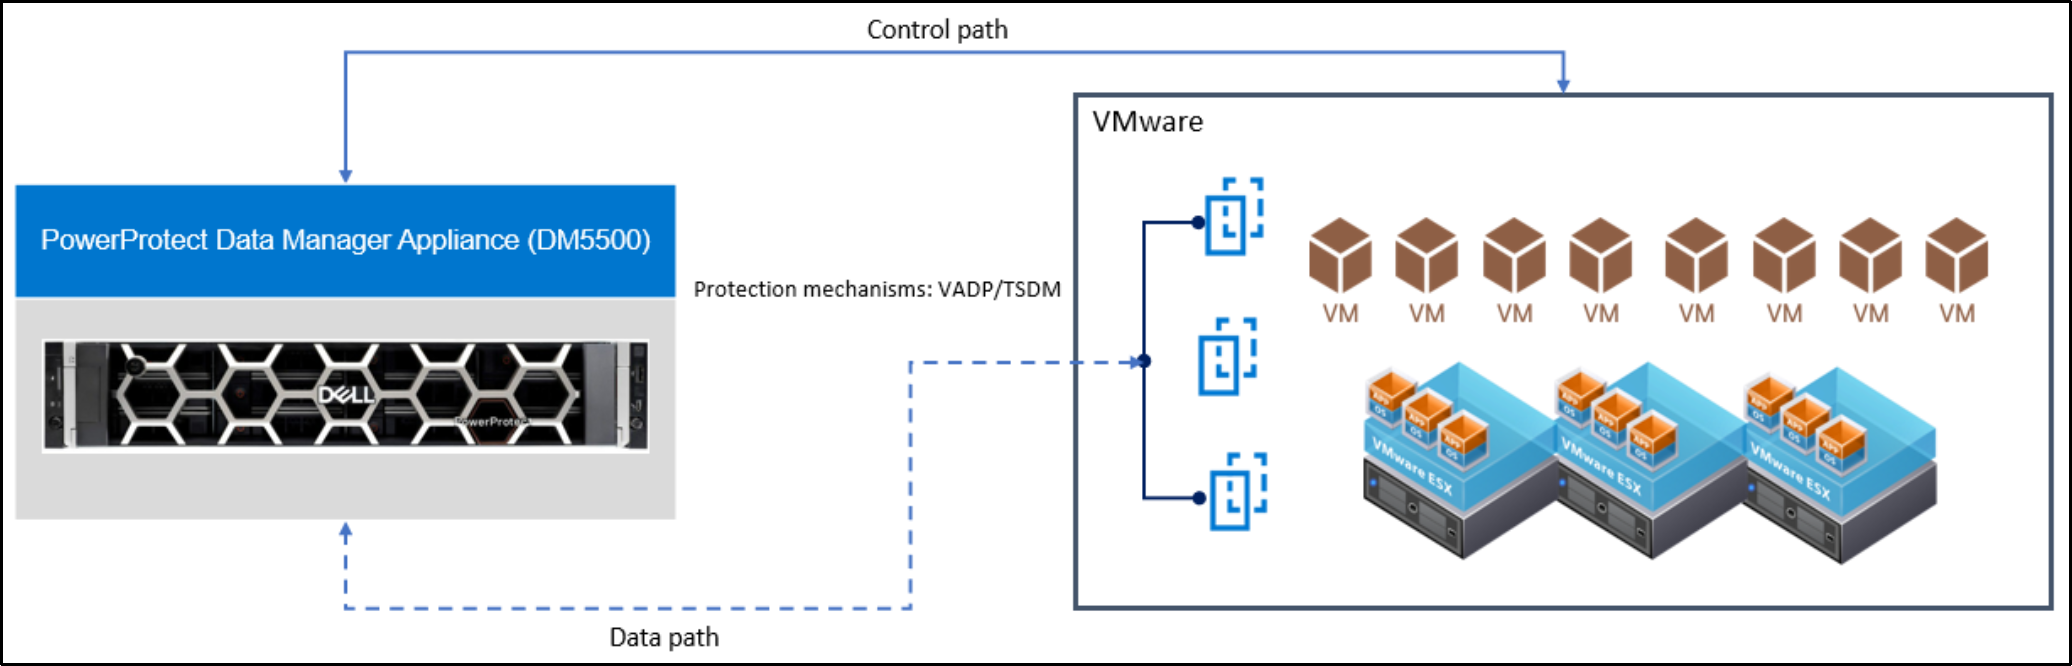 The image shows VM protection with the Data Manager Appliance